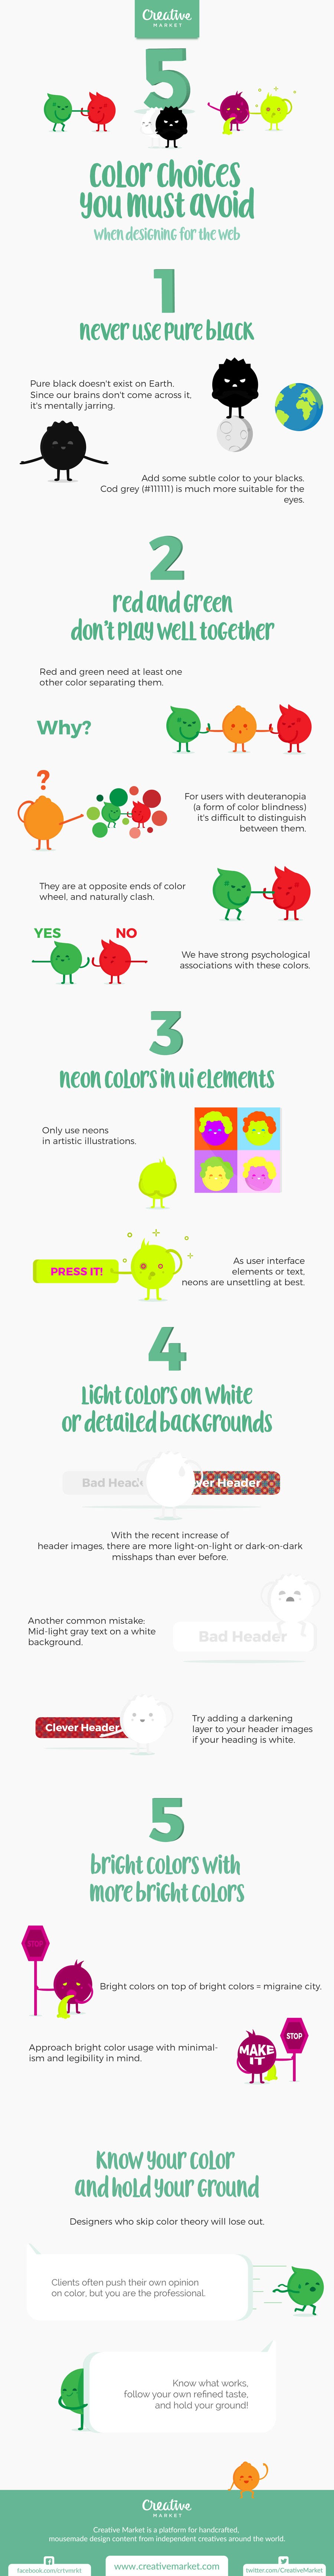 Color Choices You Must Avoid When Designing for the Web - #infographic